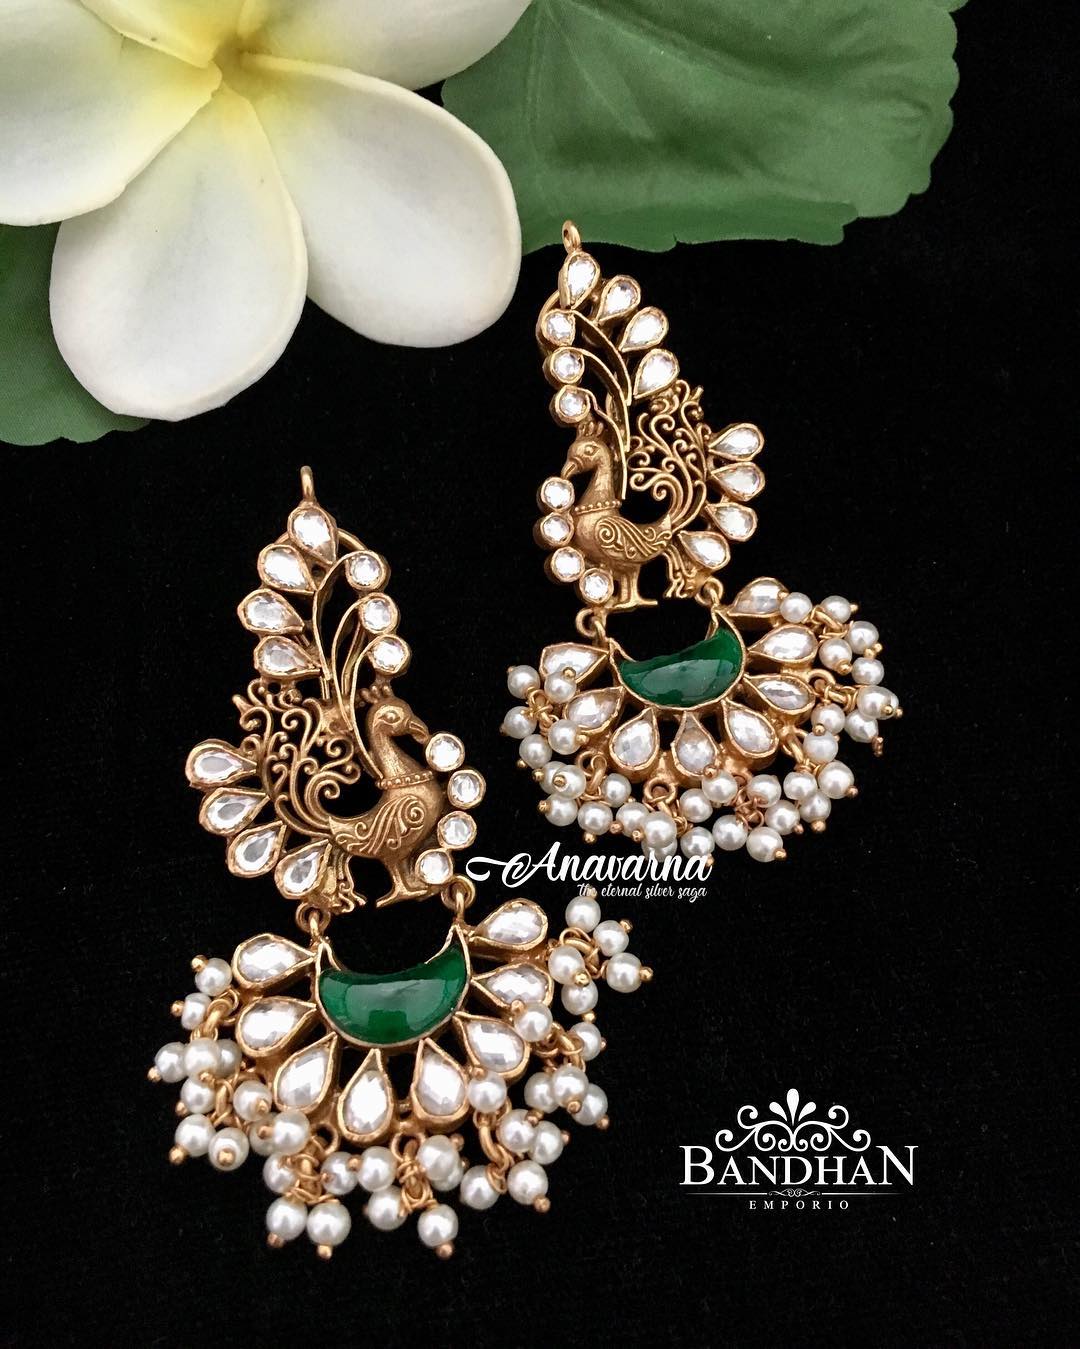 Decorative Earring From Bandhan